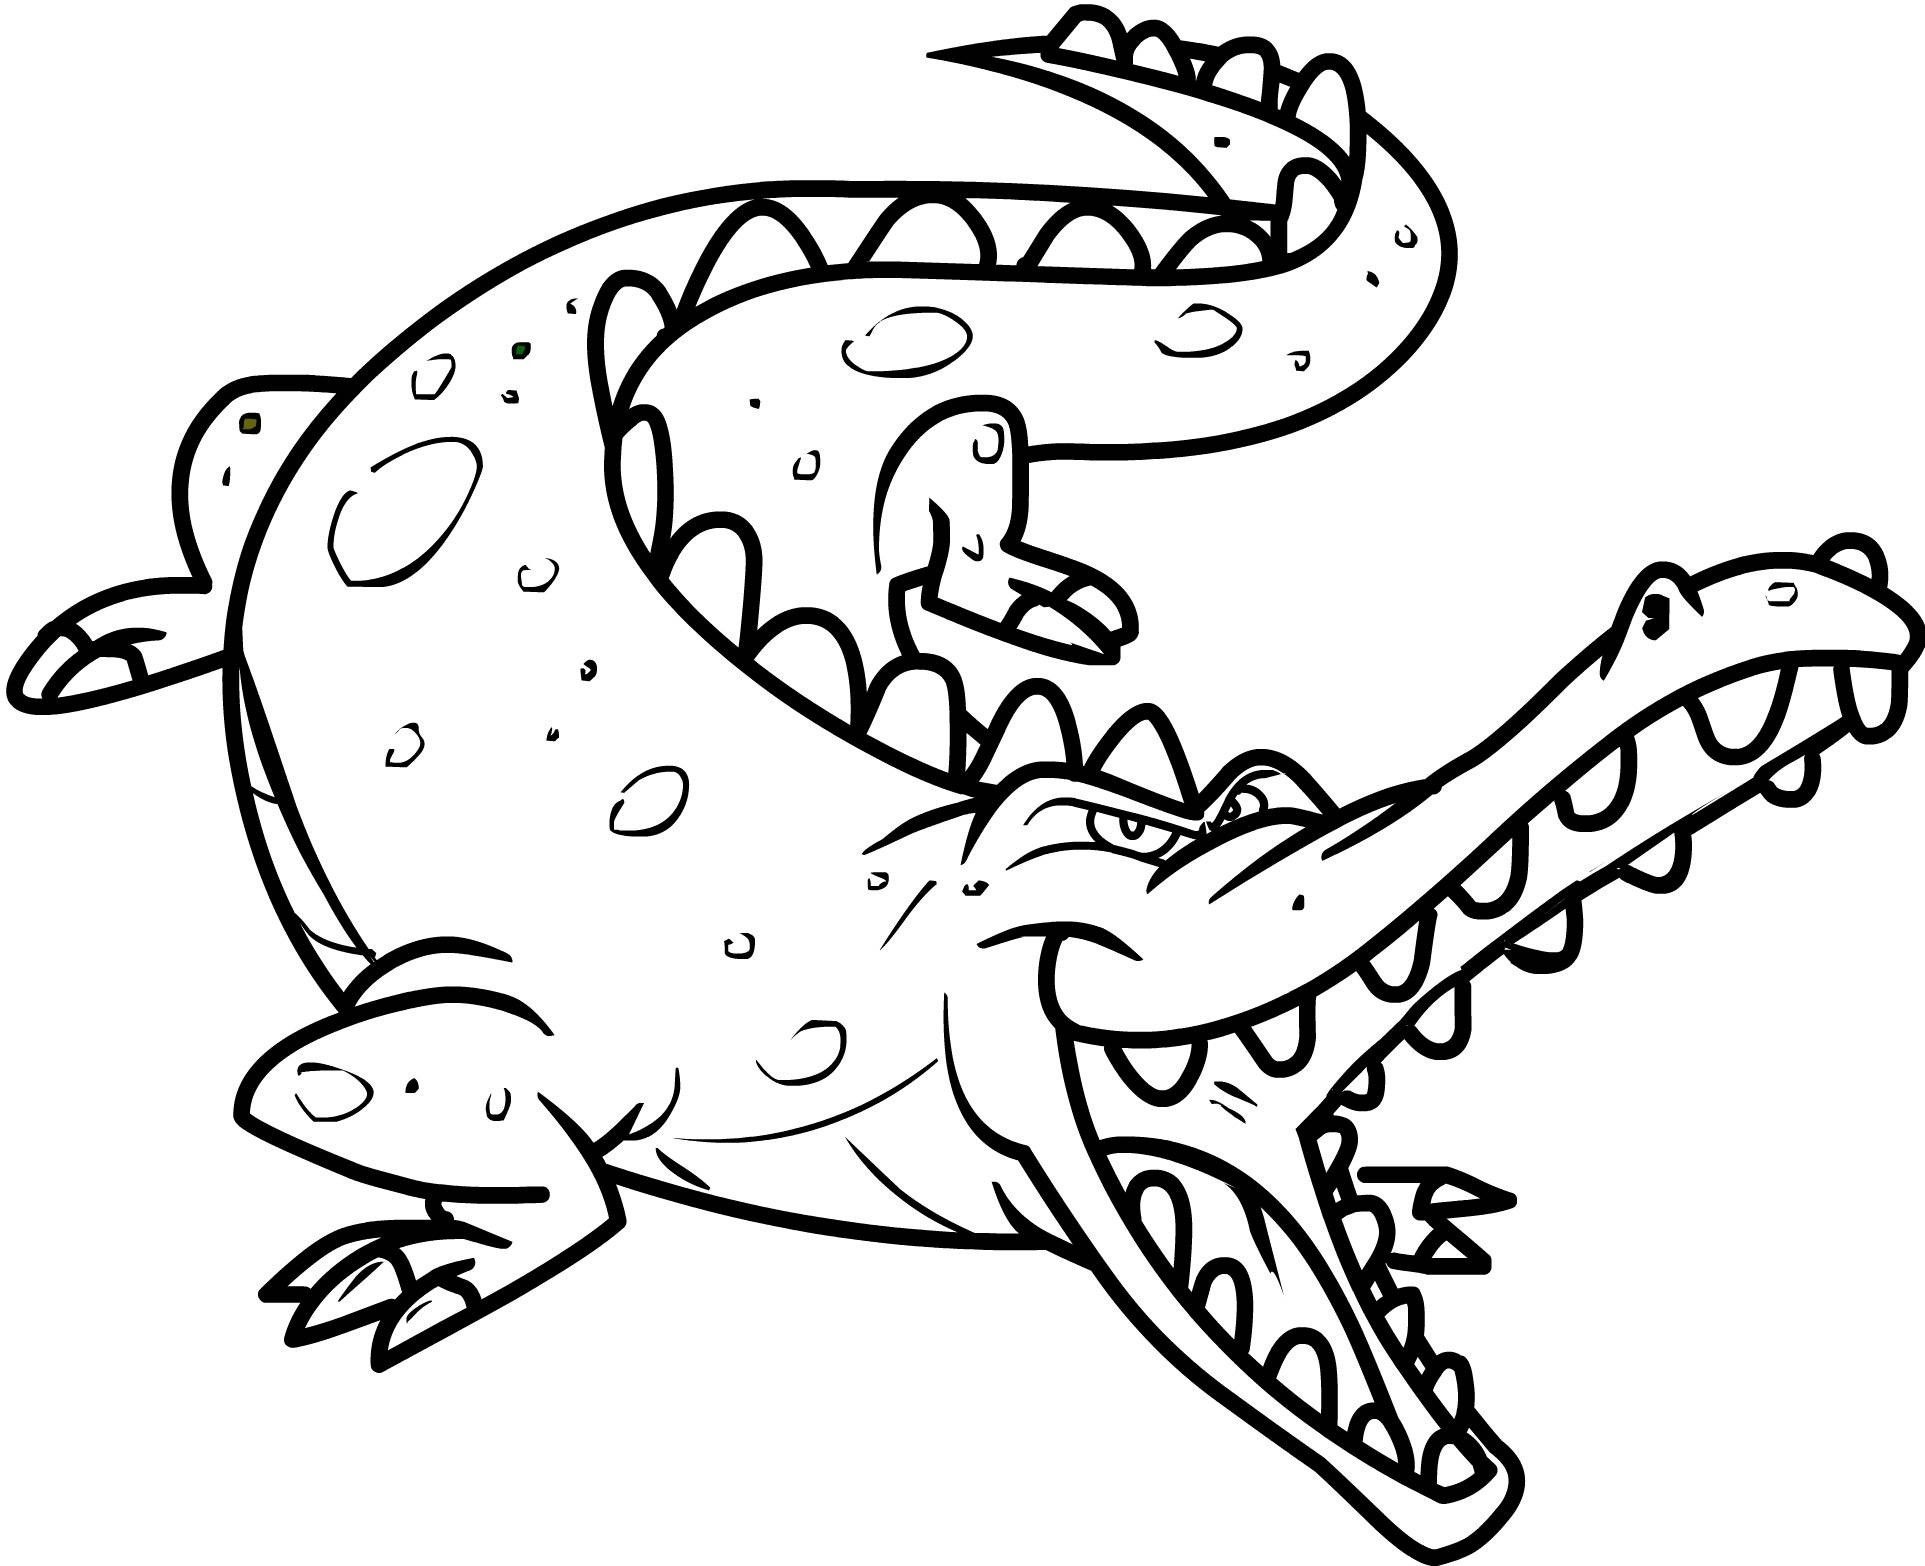 Free Printable Crocodile Coloring Pages For Kids | Pirate Theme - Free Printable Pictures Of Crocodiles